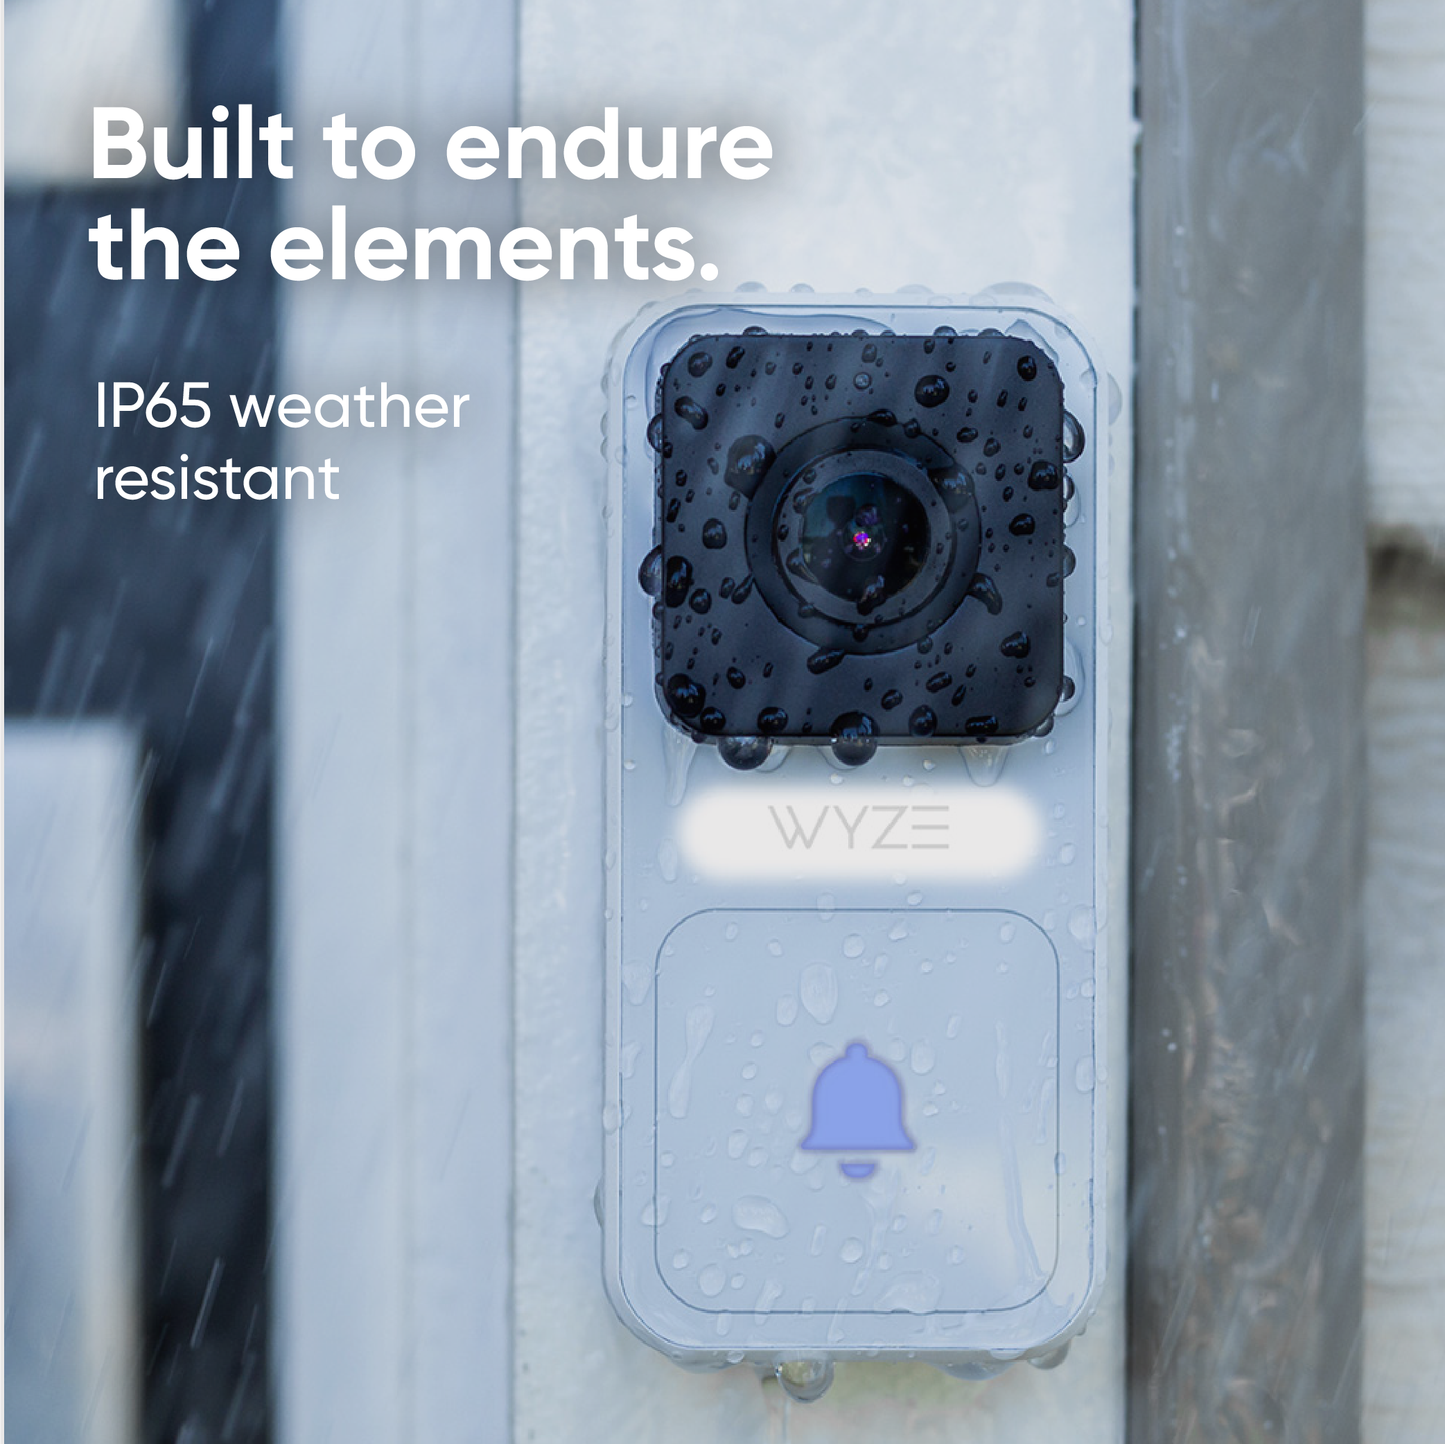 Rain covering the exterior of the Wyze Video Doorbell unit.